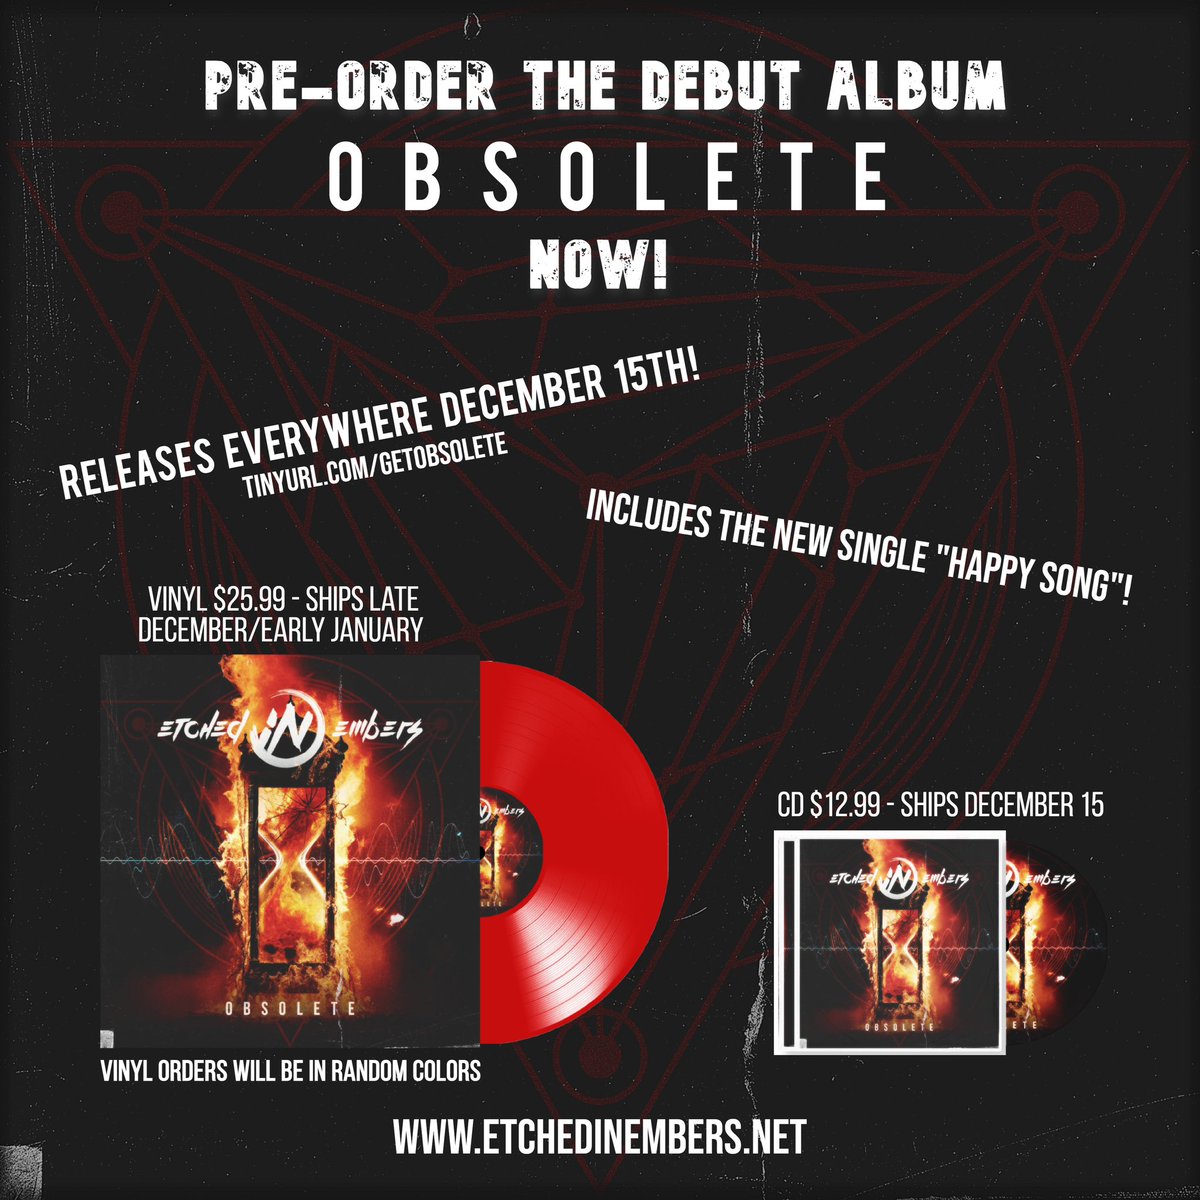 IT’S FINALLY TIME!

@EmbersEtched DEBUT ALBUM “Obsolete” releases everywhere December 15th! It’s available for pre-order NOW so go secure your Obsolete CD or VINYL! All VINYL will be signed!

PRE-SAVE link: distrokid.com/hyperfollow/et…

PRE-ORDER link: etchedinembers.net/store